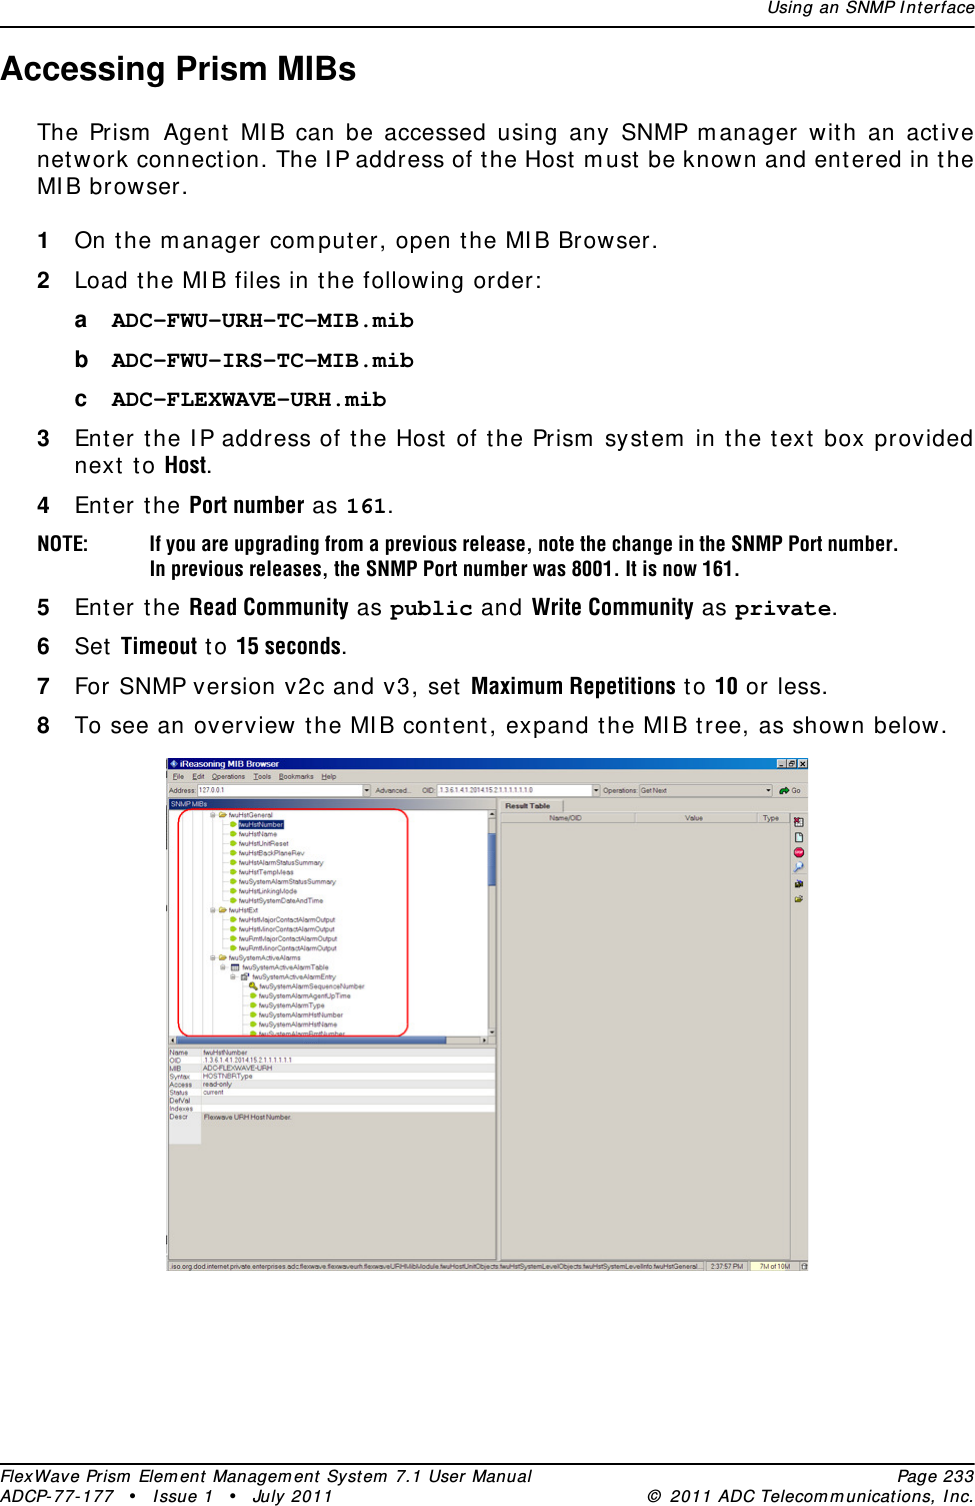 Using an SNMP I nt erfaceFlexWave Prism  Elem ent Managem ent  Syst em  7.1 User Manual Page 233ADCP- 77- 177  • I ssue 1 • July 2011 ©  2011 ADC Telecom m unicat ions, I nc.Accessing Prism MIBsThe Prism  Agent  MI B can be accessed using any SNMP m anager wit h an act ive net work connect ion. The I P address of t he Host m ust  be known and ent ered in t he MI B browser.1On t he m anager com puter, open t he MI B Browser. 2Load t he MI B files in the following order:aADC-FWU-URH-TC-MIB.mib bADC-FWU-IRS-TC-MIB.mib cADC-FLEXWAVE-URH.mib 3Ent er t he I P address of t he Host of t he Prism  syst em  in t he t ext box provided next  to Host. 4Enter the Port number as 161.NOTE: If you are upgrading from a previous release, note the change in the SNMP Port number. In previous releases, the SNMP Port number was 8001. It is now 161.5Enter the Read Community as public and Write Community as private.6Set Timeout t o 15 seconds.7For SNMP version v2c and v3, set Maximum Repetitions t o 10 or less.8To see an overview t he MI B cont ent , expand t he MI B t ree, as shown below. 